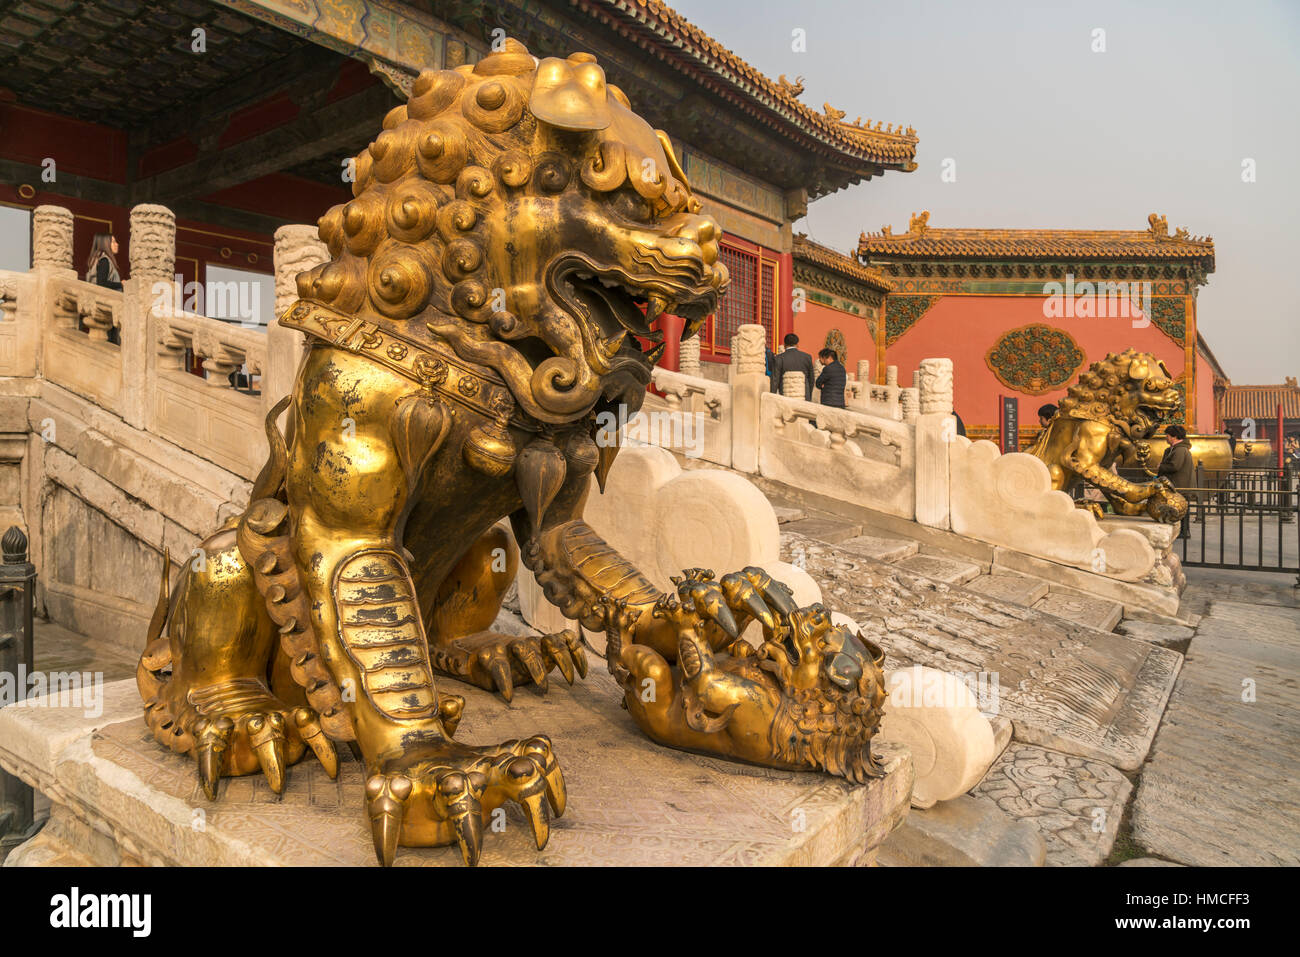 golden  lions guarding the Gates of the Forbidden City, Beijing, People's Republic of China, Asia Stock Photo